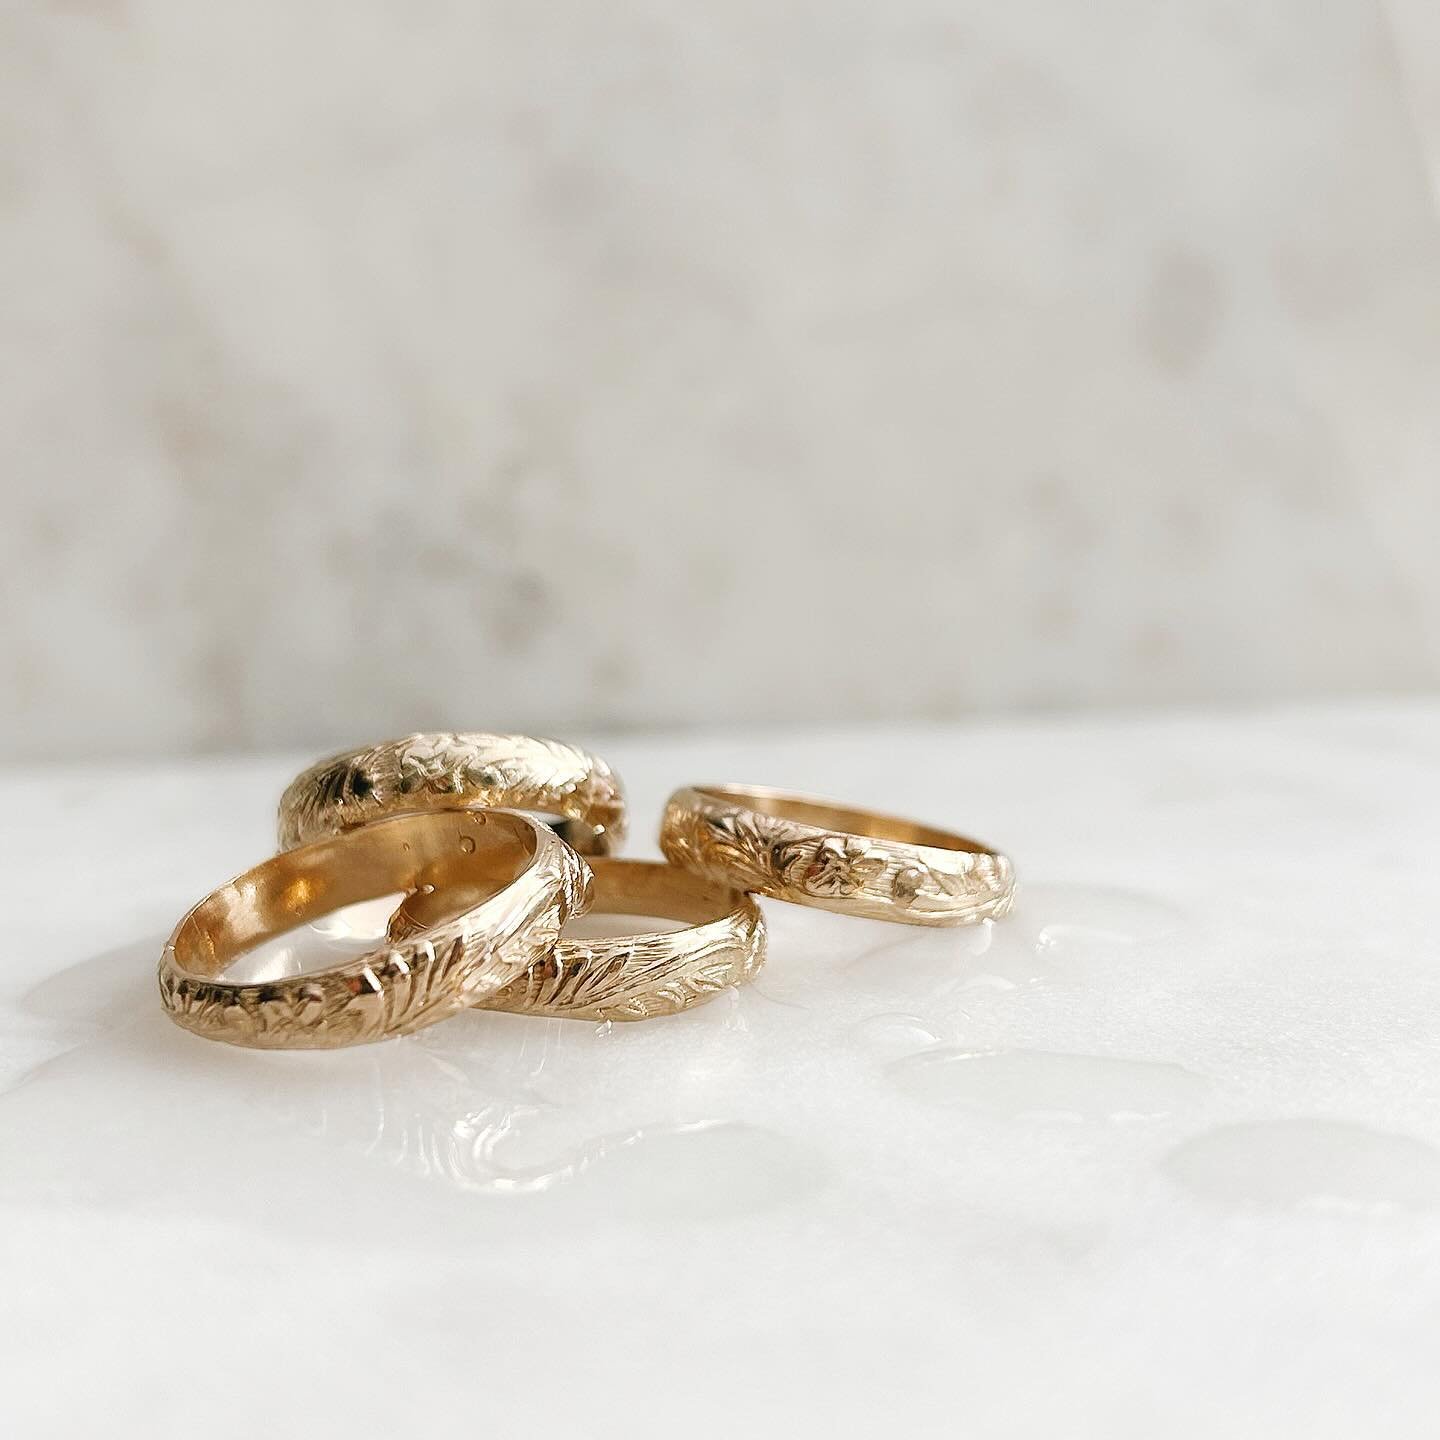 💍🌸 Say hello to our gorgeous floral rings made from goldfill! 

They&rsquo;re waterproof and ready just in time for summer fun in the pool or the lake. Catch these beauties at the 613 Flea Market this weekend&mdash;don&rsquo;t miss out! See you the